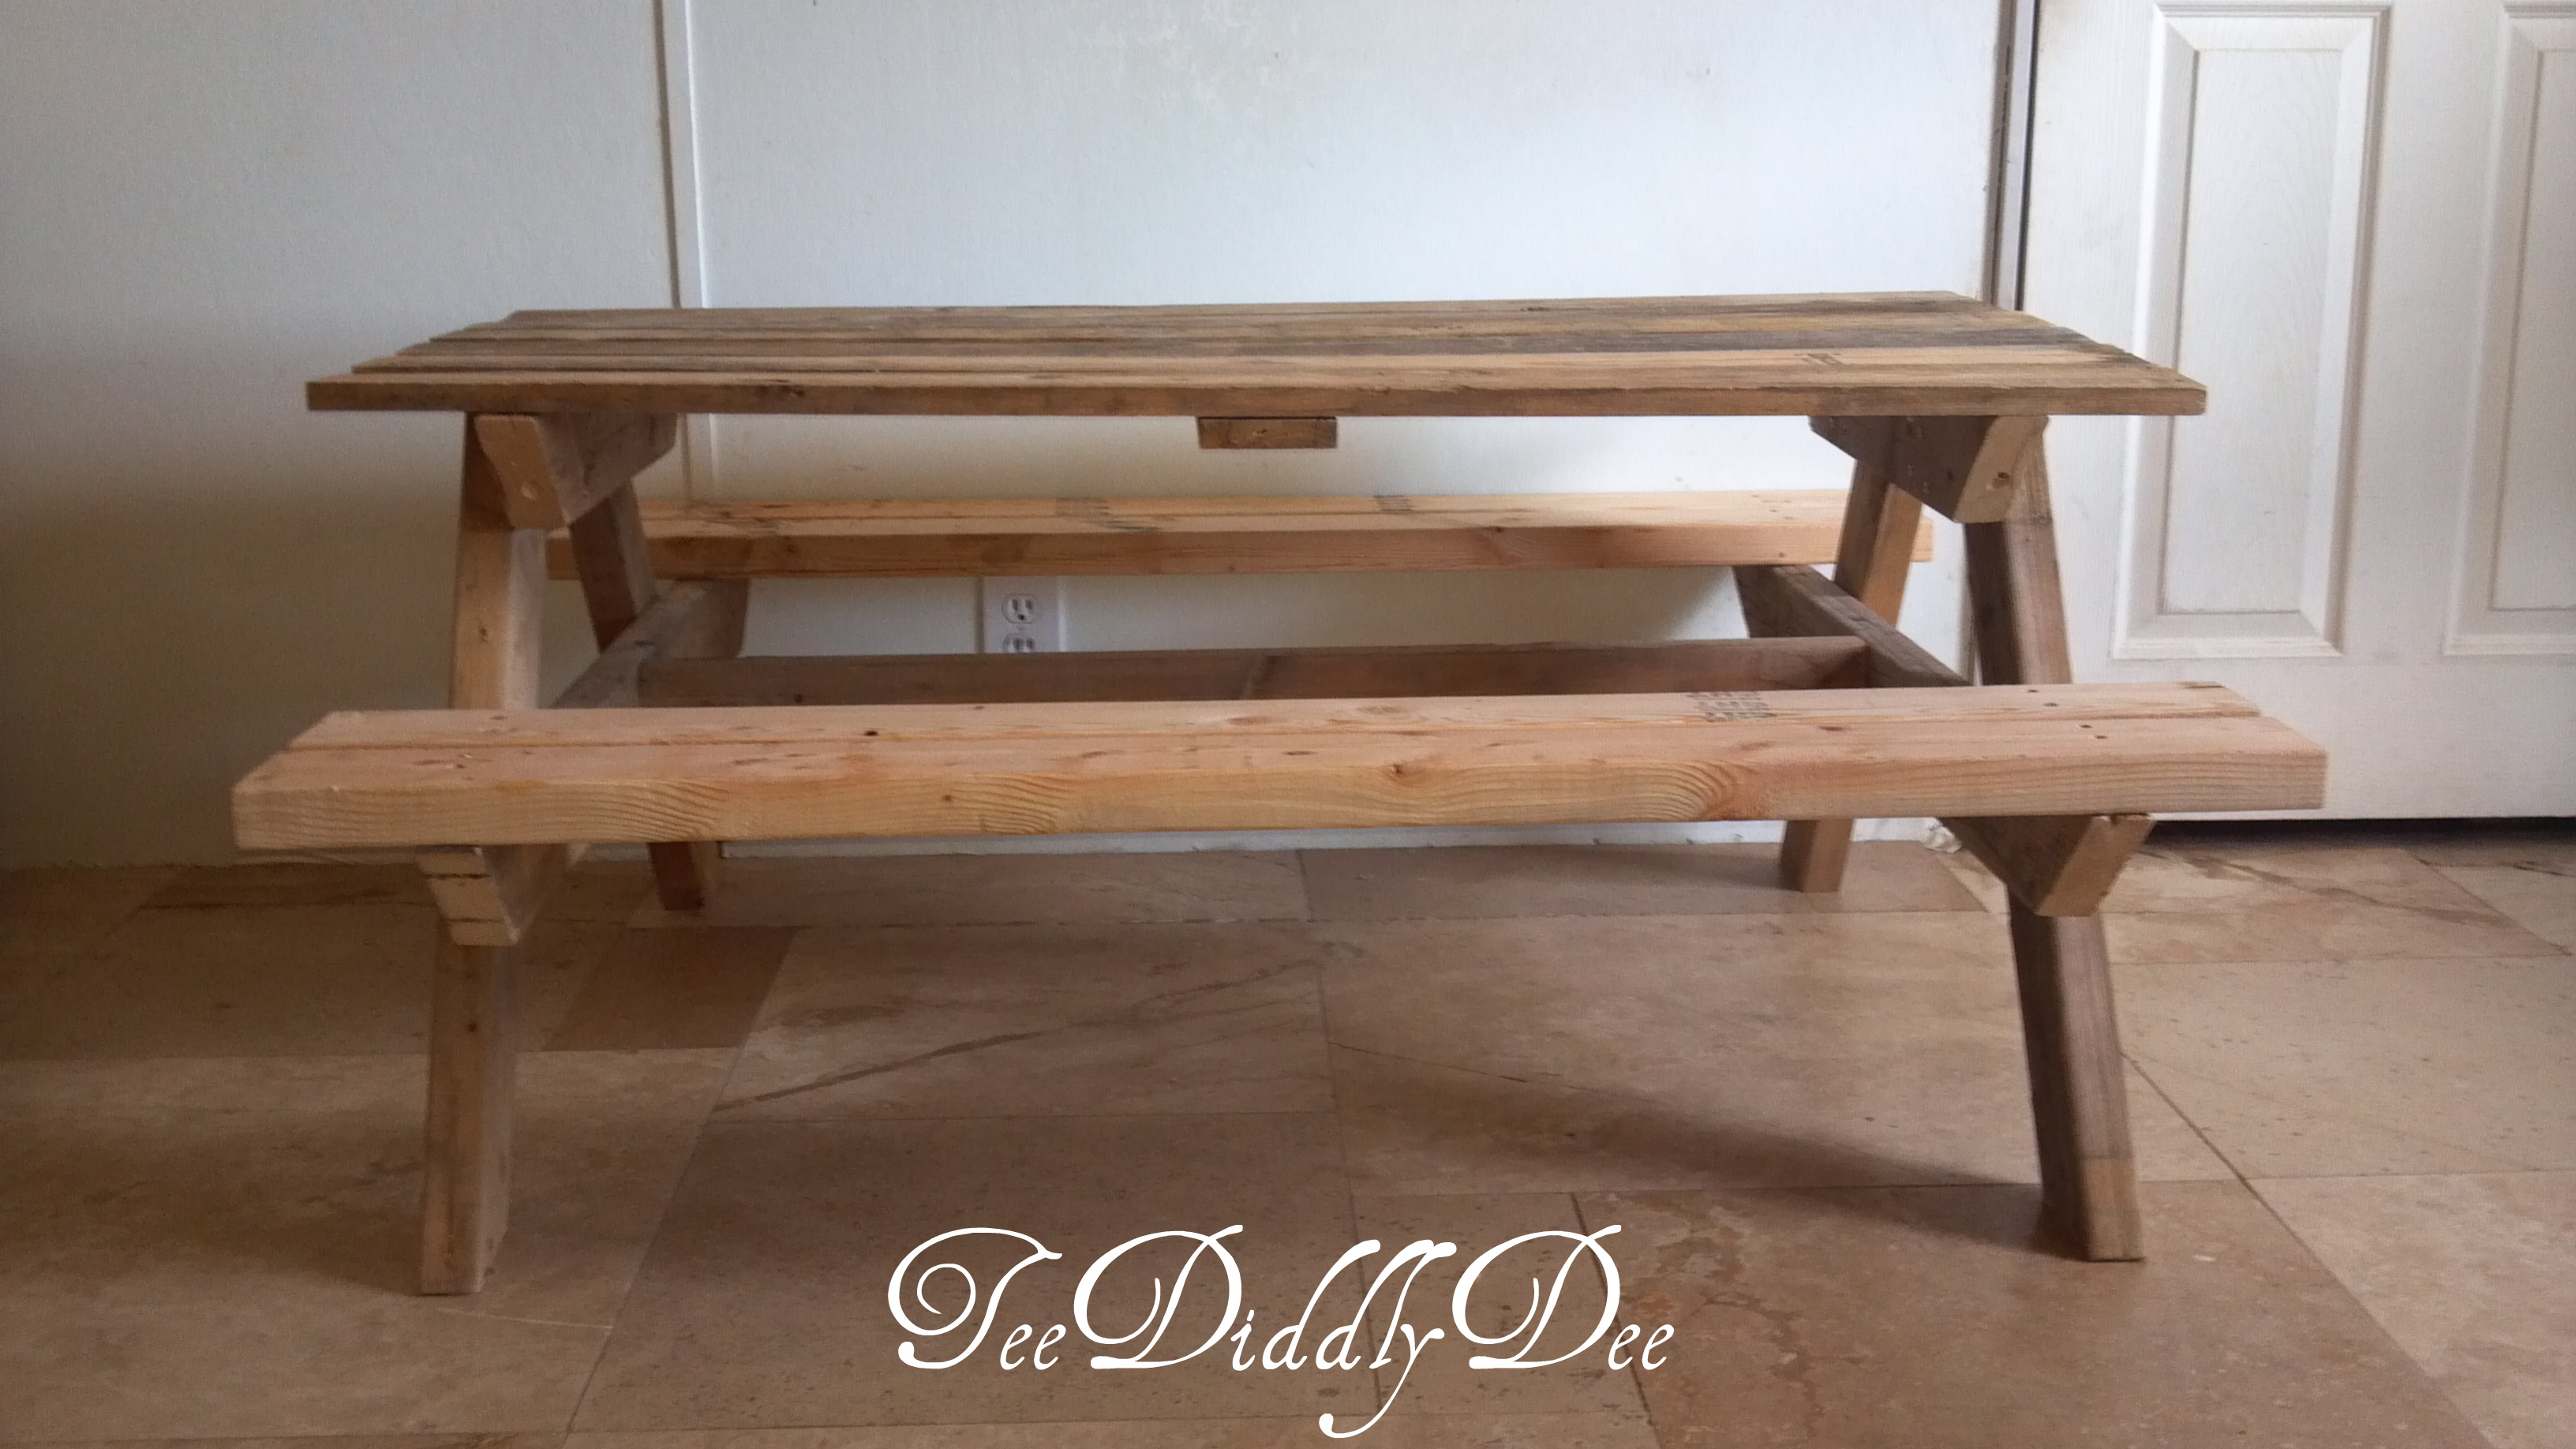 How to Build Kid Size Picnic Table Out of Old Recycled Pallet Wood ...